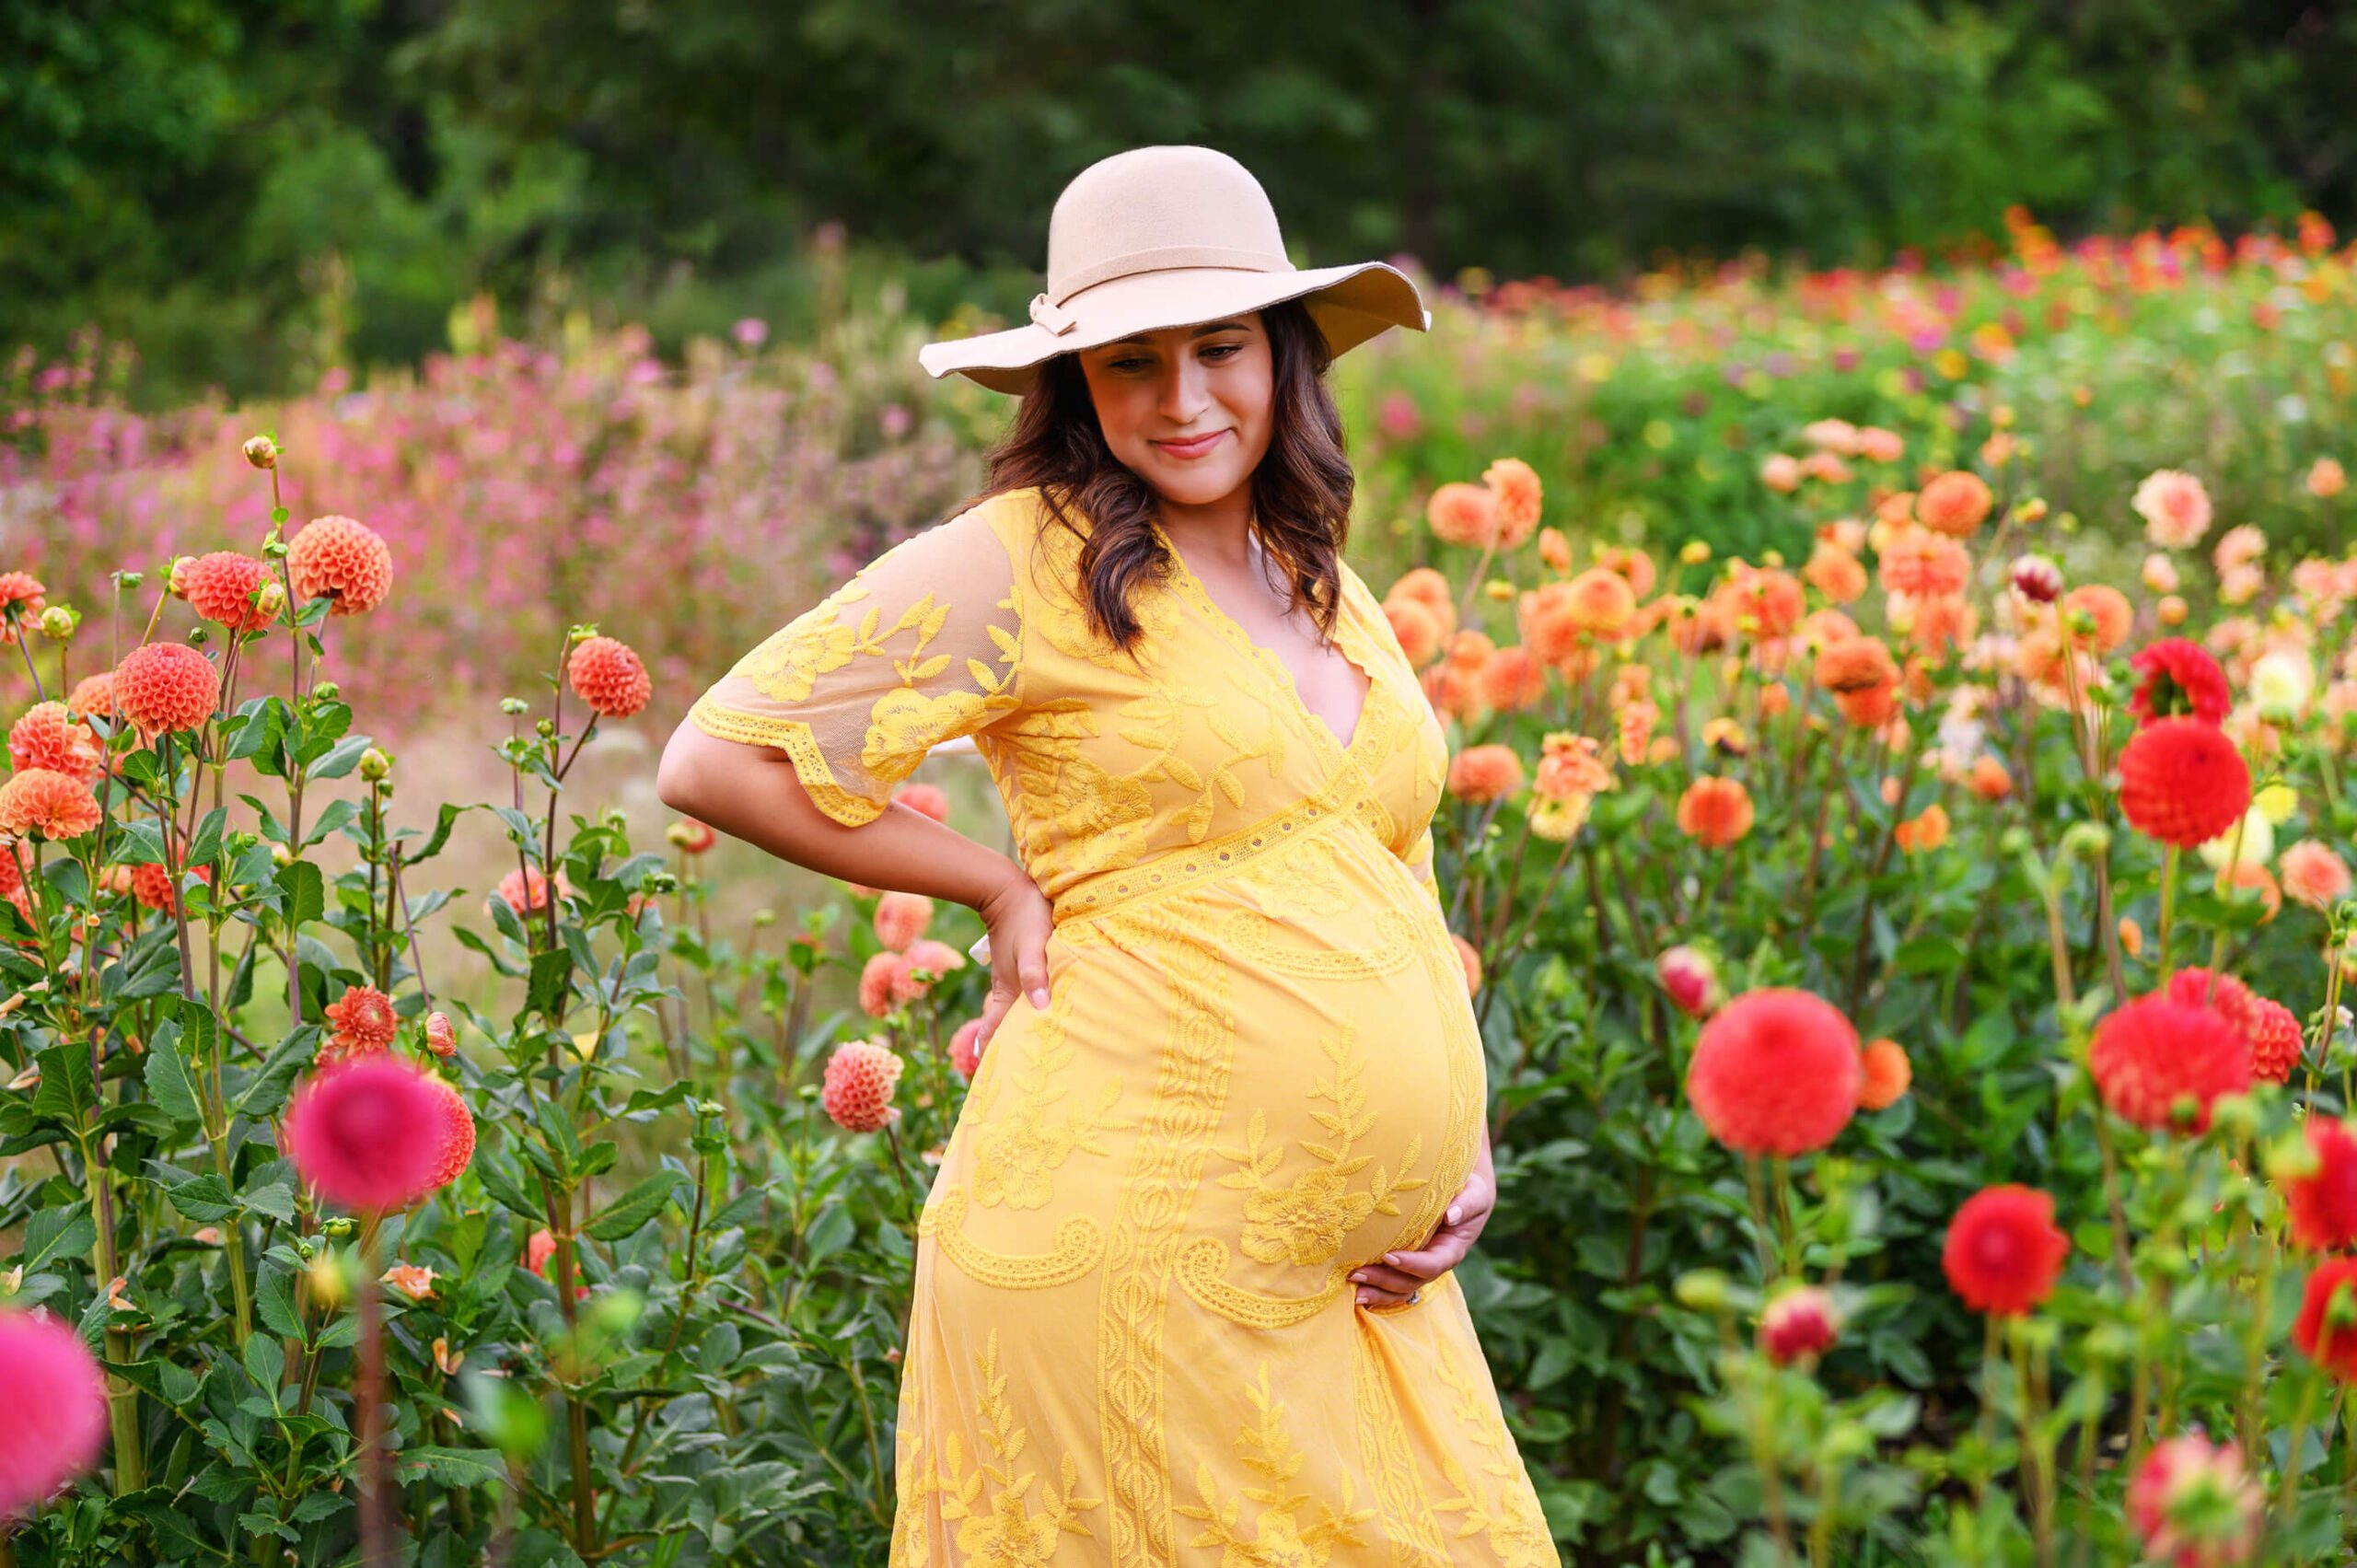 mom wearing a had and a yellow dress smiling Toronto Maternity Photographer